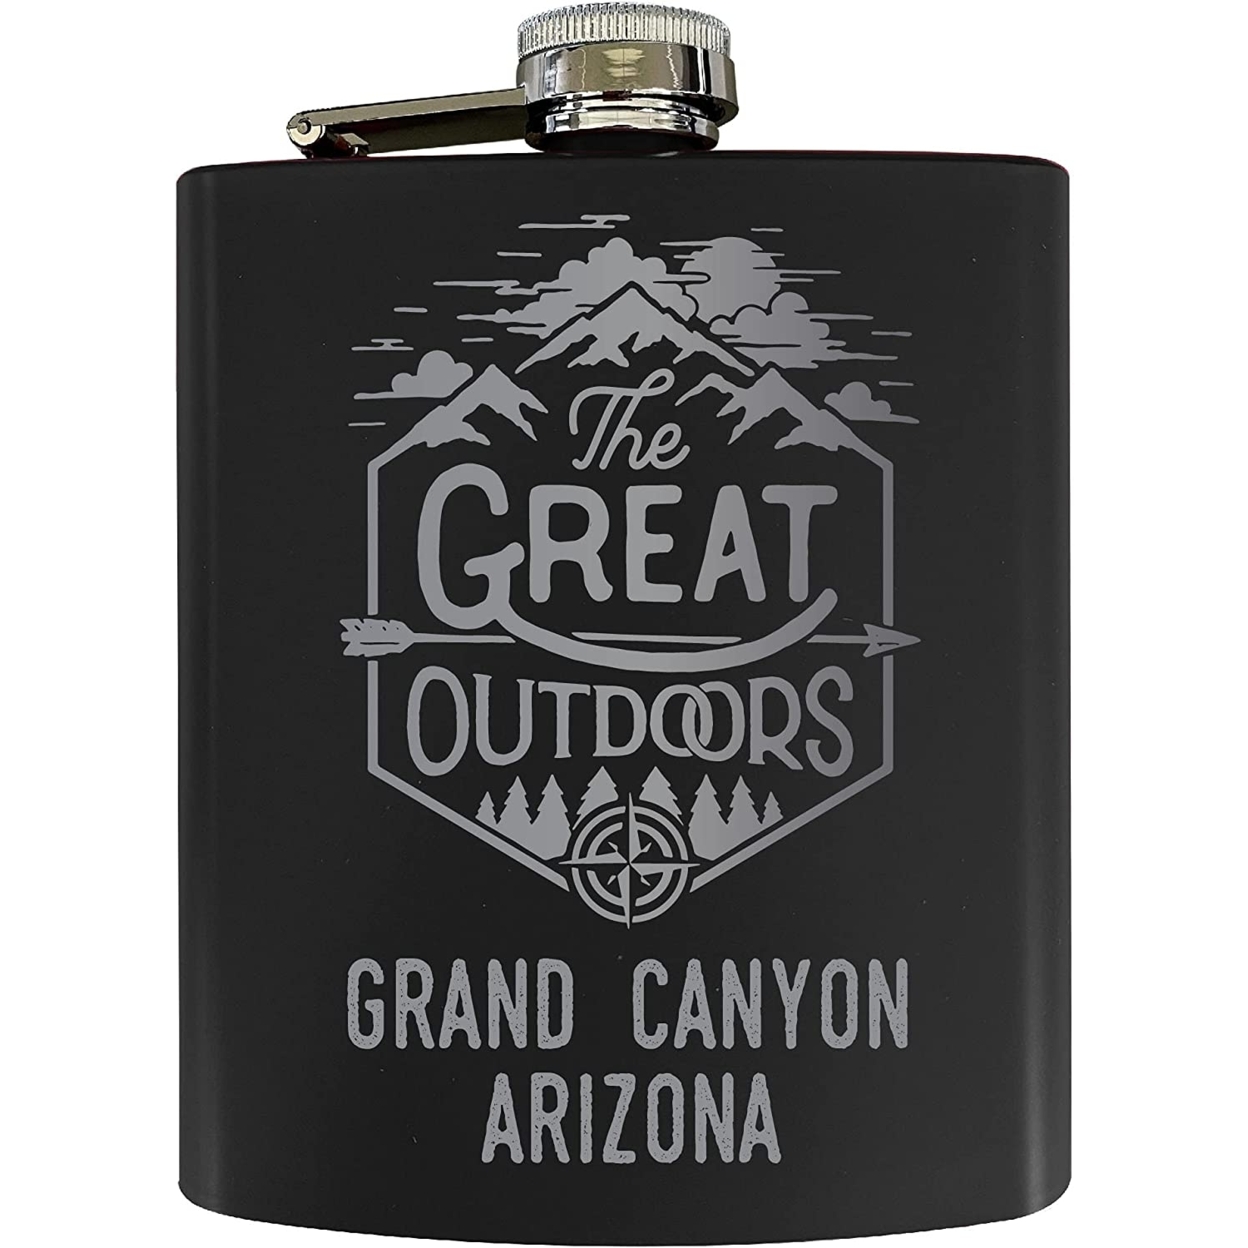 Grand Canyon Arizona Laser Engraved Explore The Outdoors Souvenir 7 Oz Stainless Steel Flask - Red